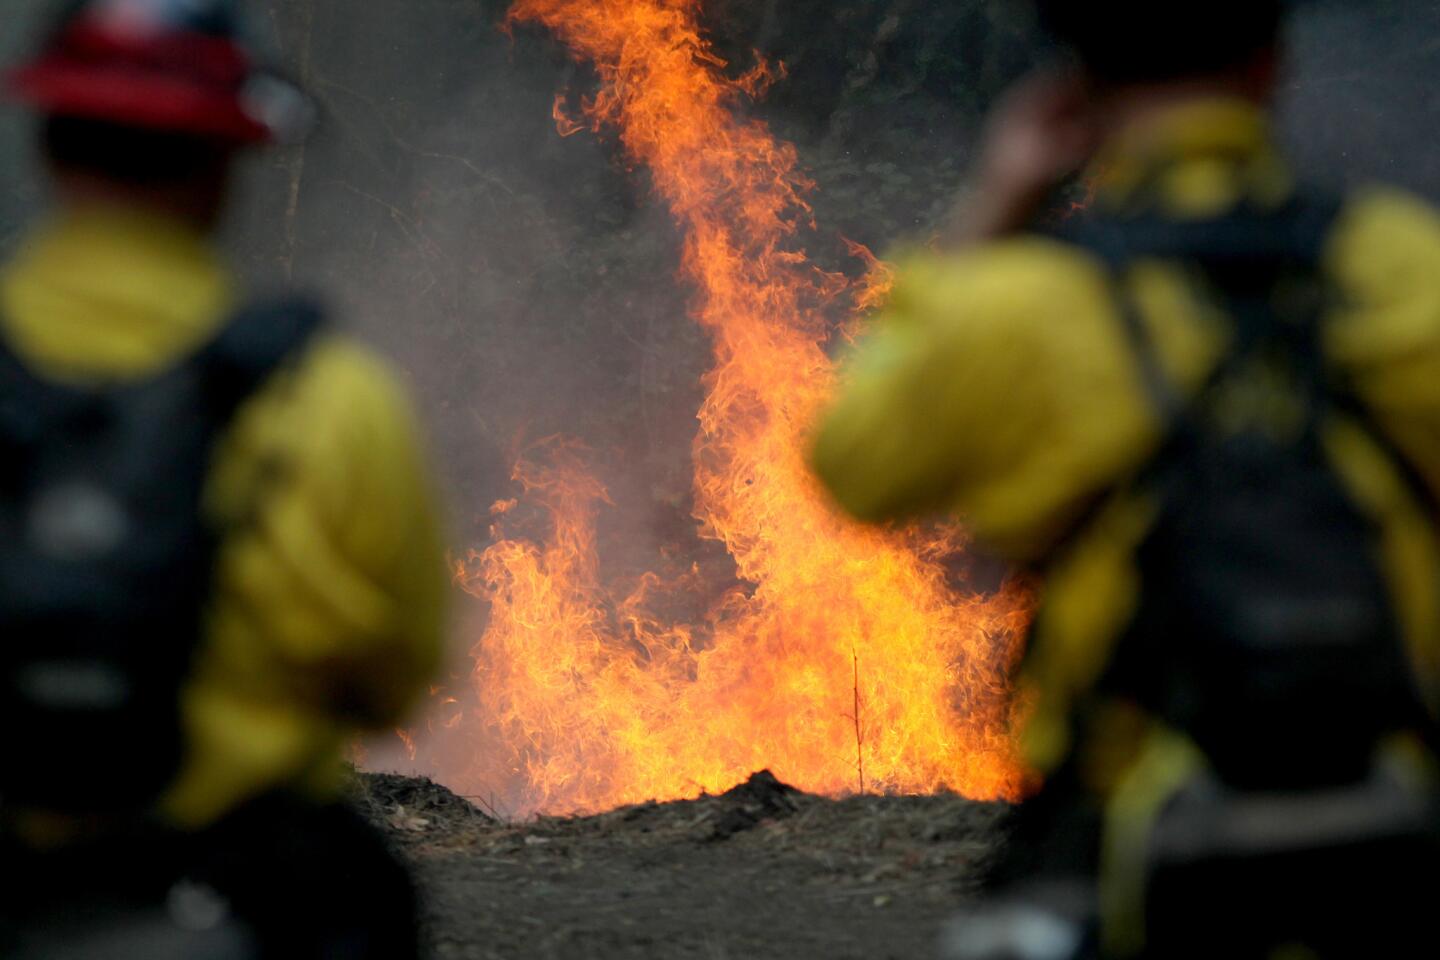 Cal Fire firefighters monitor a burning section of a wildfire on the Garzas Trail in the Santa Lucia Preserve above Carmel Valley, Calif., July 28, 2016. Firefighters struggled Thursday to get the upper hand on a massive wildfire burning along California's picturesque Big Sur coastline, where anxious residents driven from their homes awaited word on their properties and popular parks and trails closed at the height of tourist season.